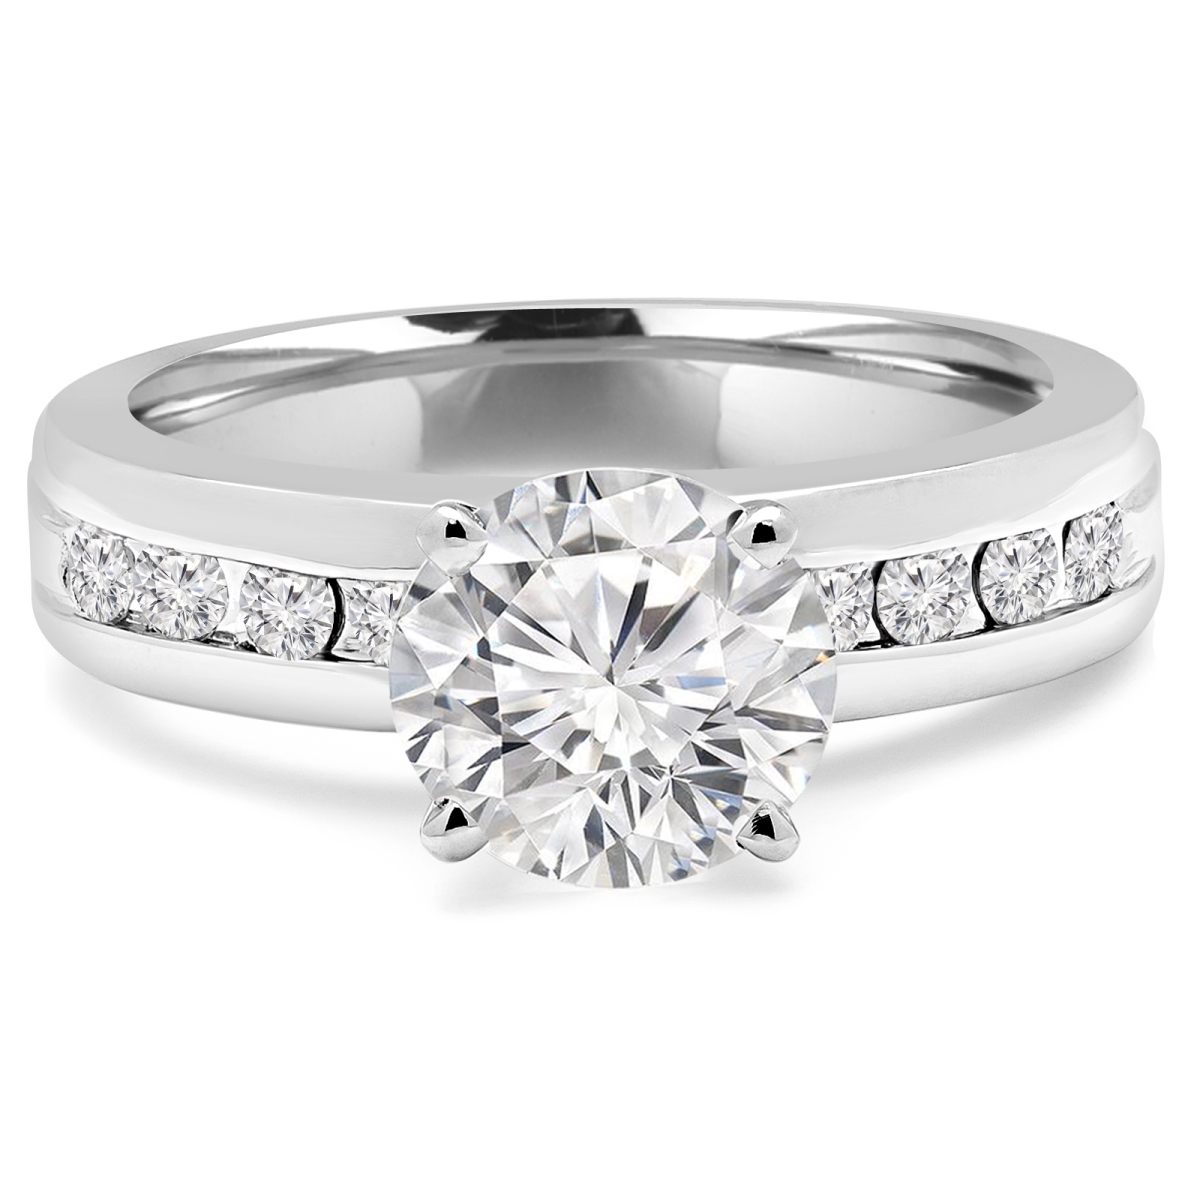 1.4 CTW Round Diamond Solitaire Engagement Ring with Channel Set Accents in 14K White Gold - Size 7.5 -  Great Gems, GR3073210